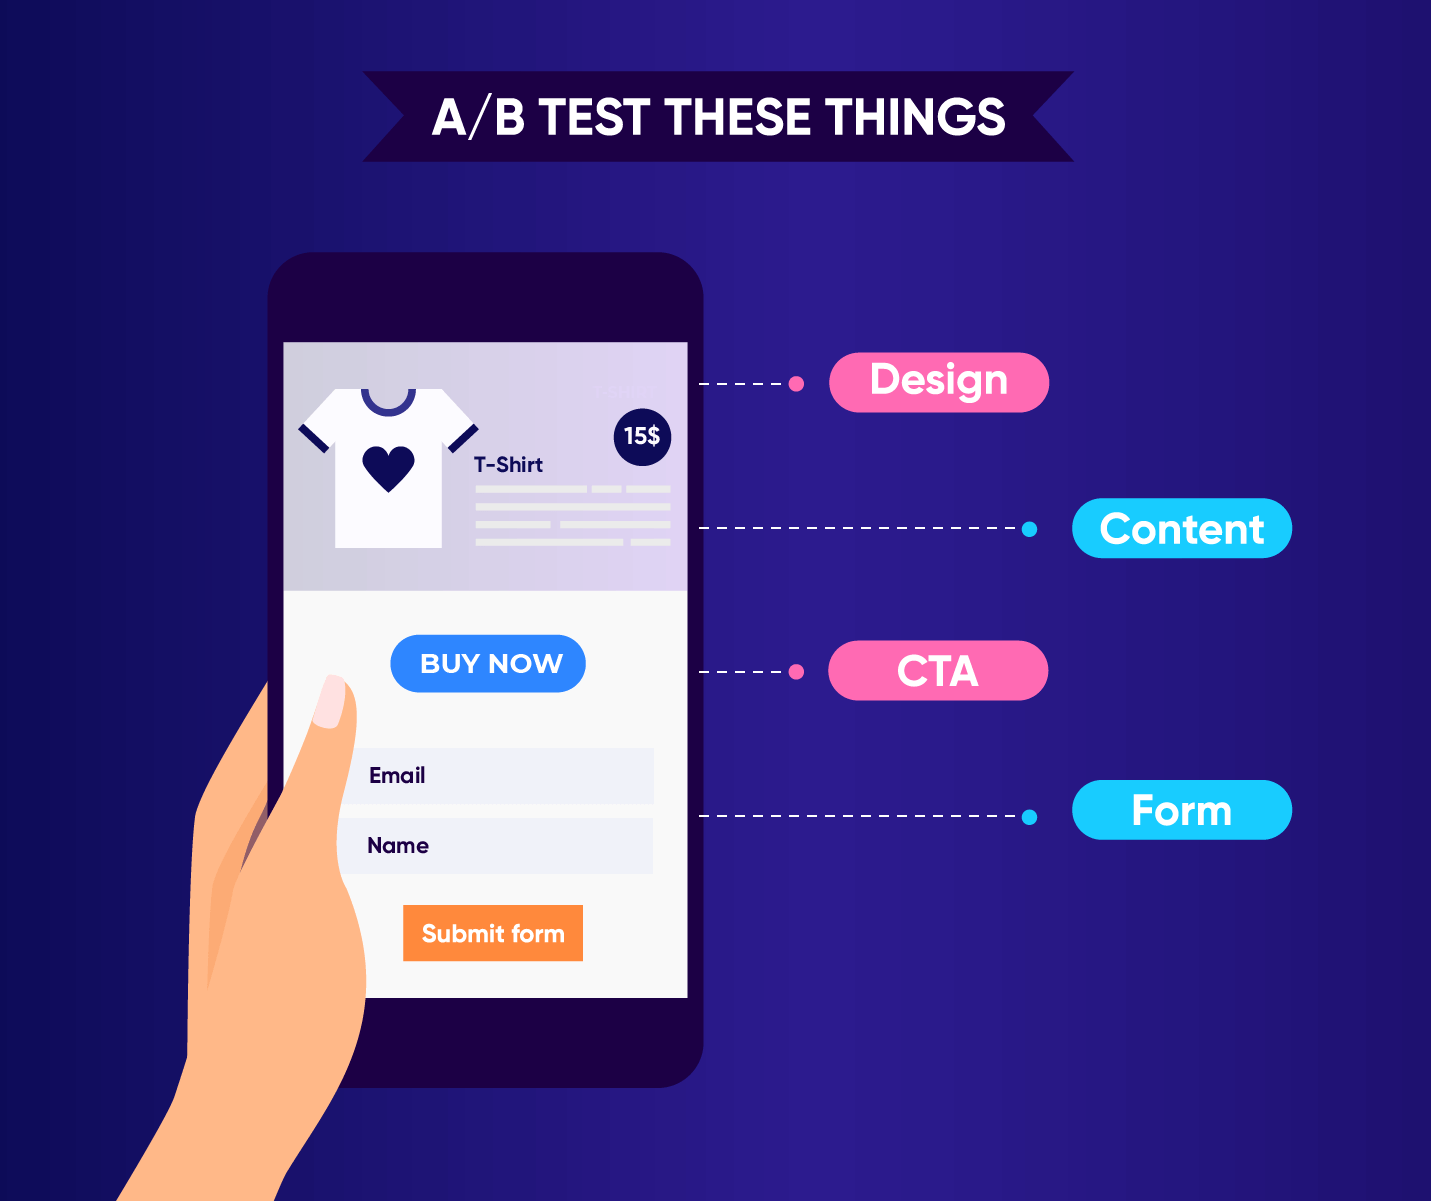 Design A/B Testing - 4 things to test for in any campaign